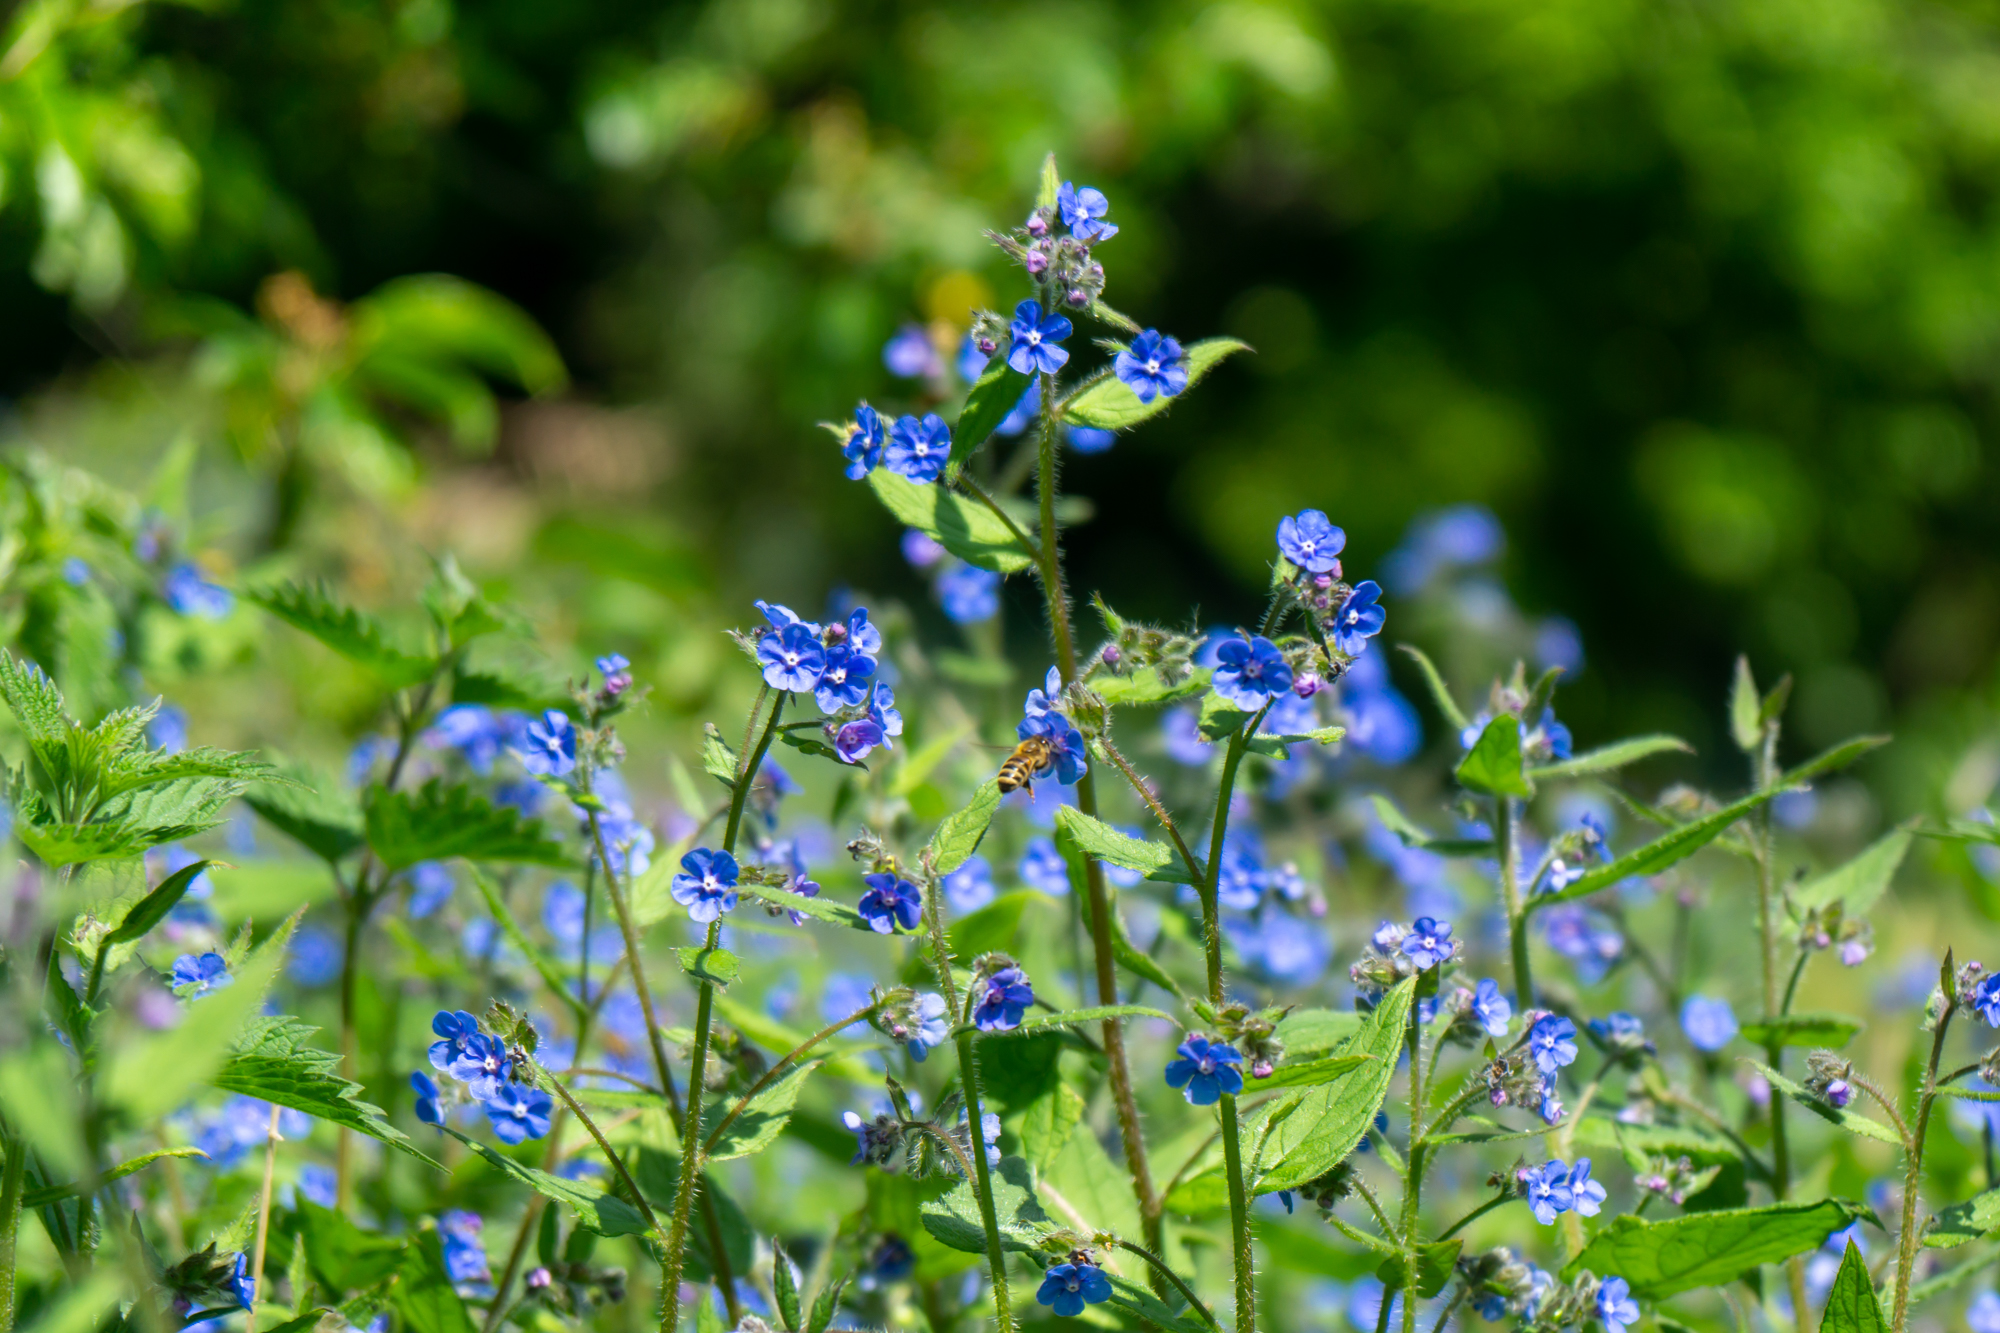 Some blue wild flowers sit amongst nettles. A honey bee can be seen on one of the flowers.